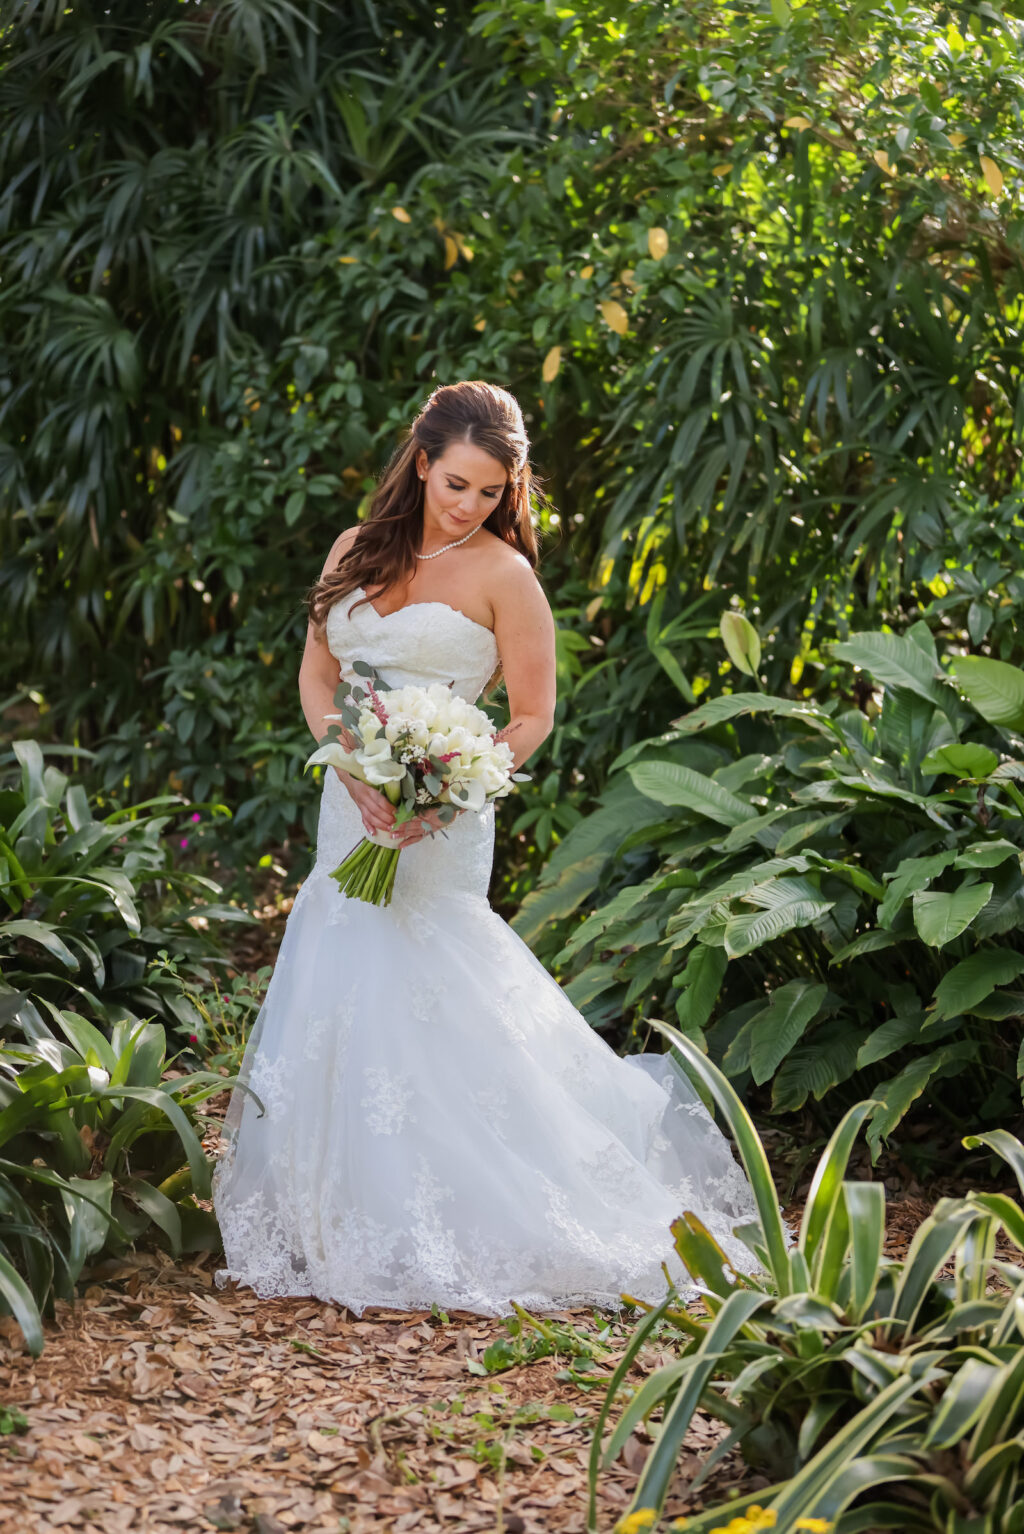 Florida Bride Holding Classic Romantic White Floral Bouquet | Tampa Bay Wedding Photographer Lifelong Photography Studio | Wedding Hair and Makeup Michele Renee the Studio | Wedding Dress Truly Forever Bridal